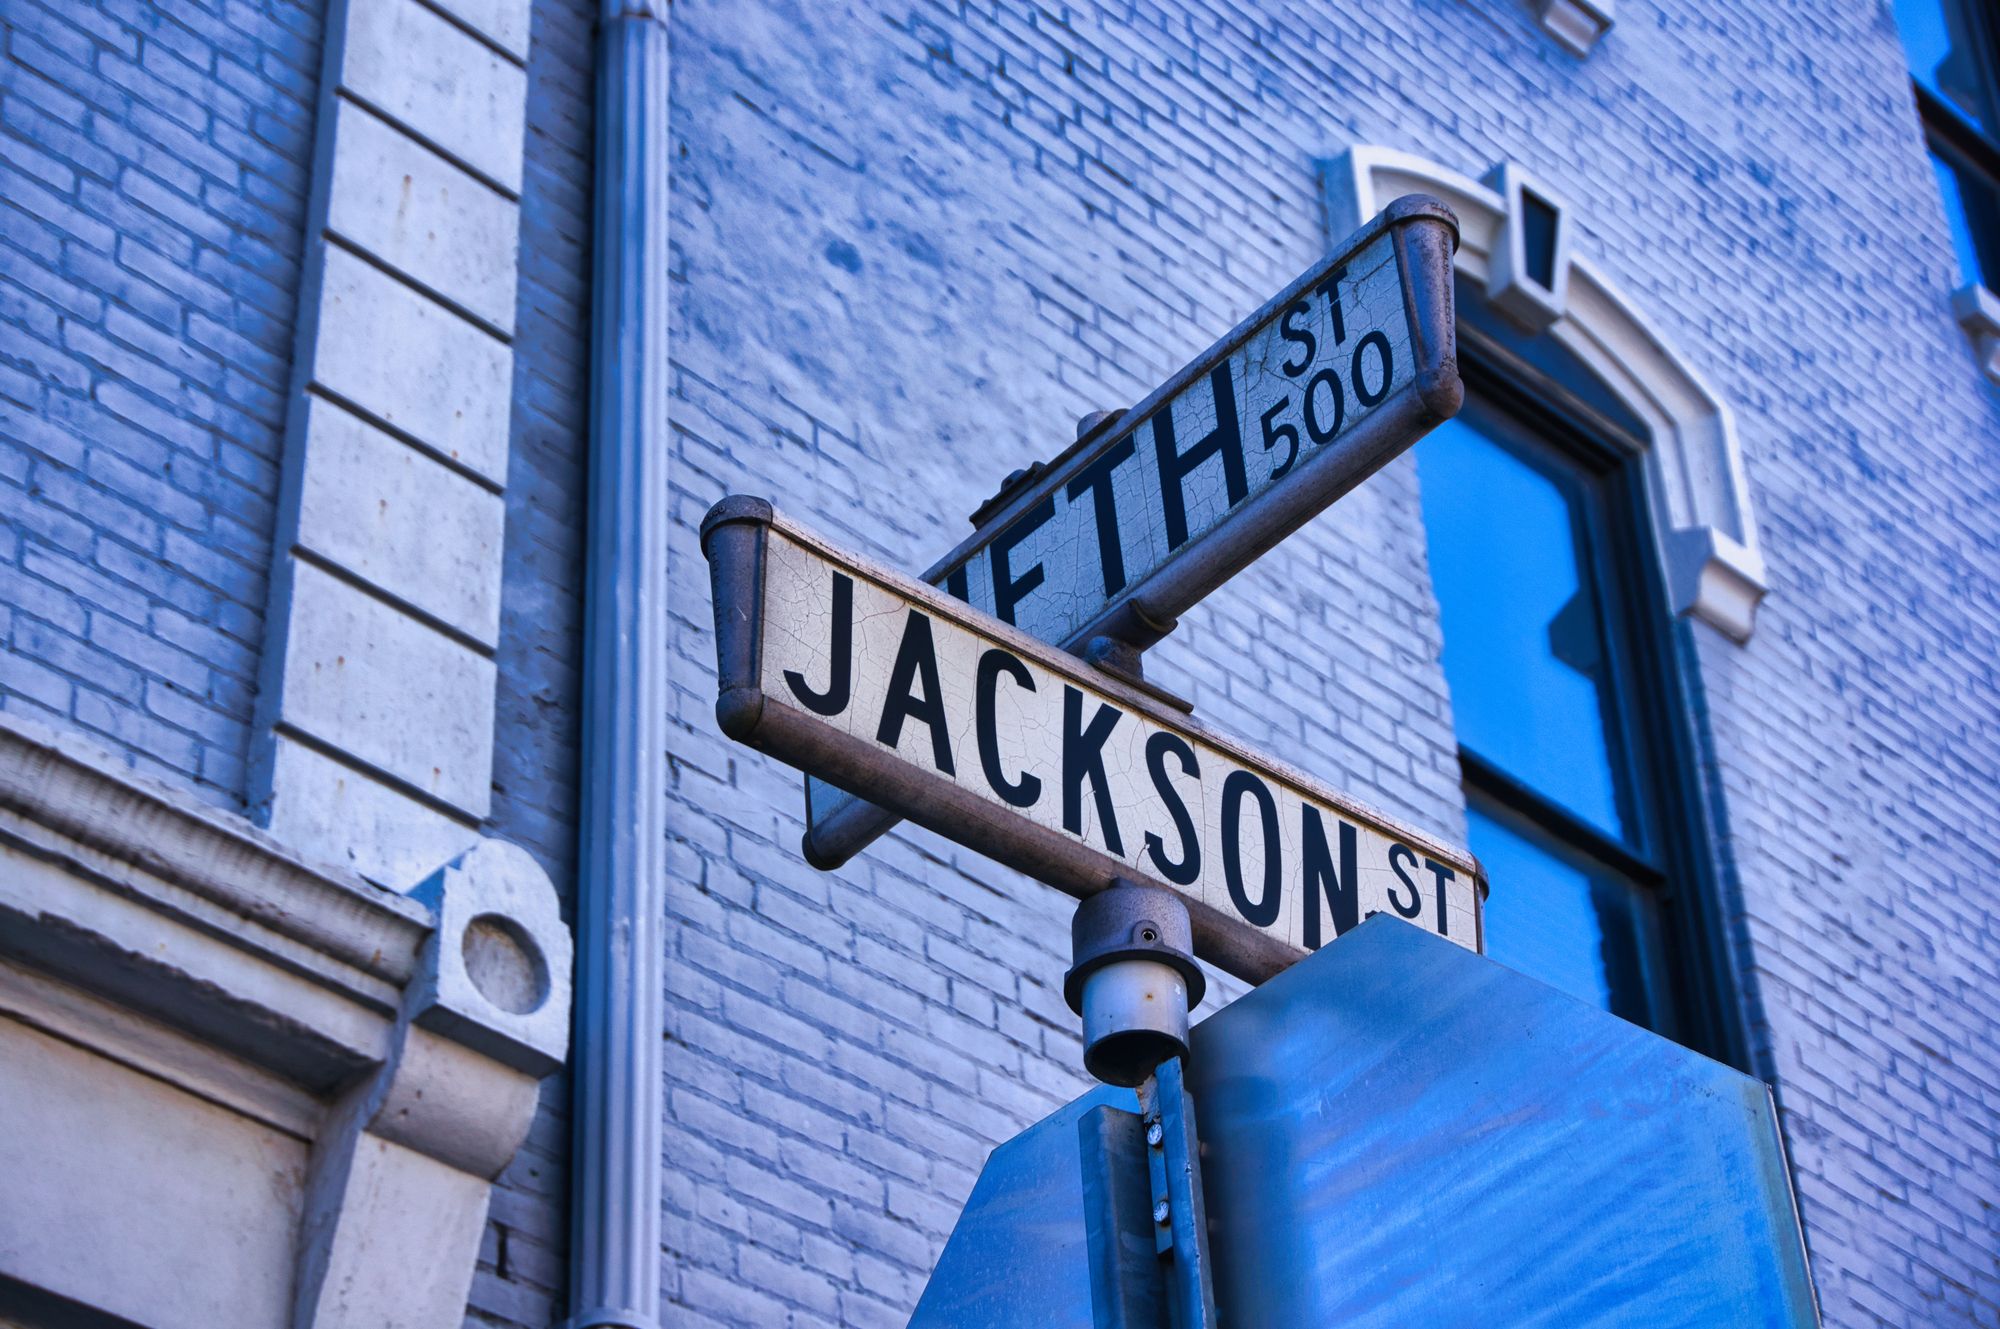 Fifth and Jackson street sign in the Oregon District